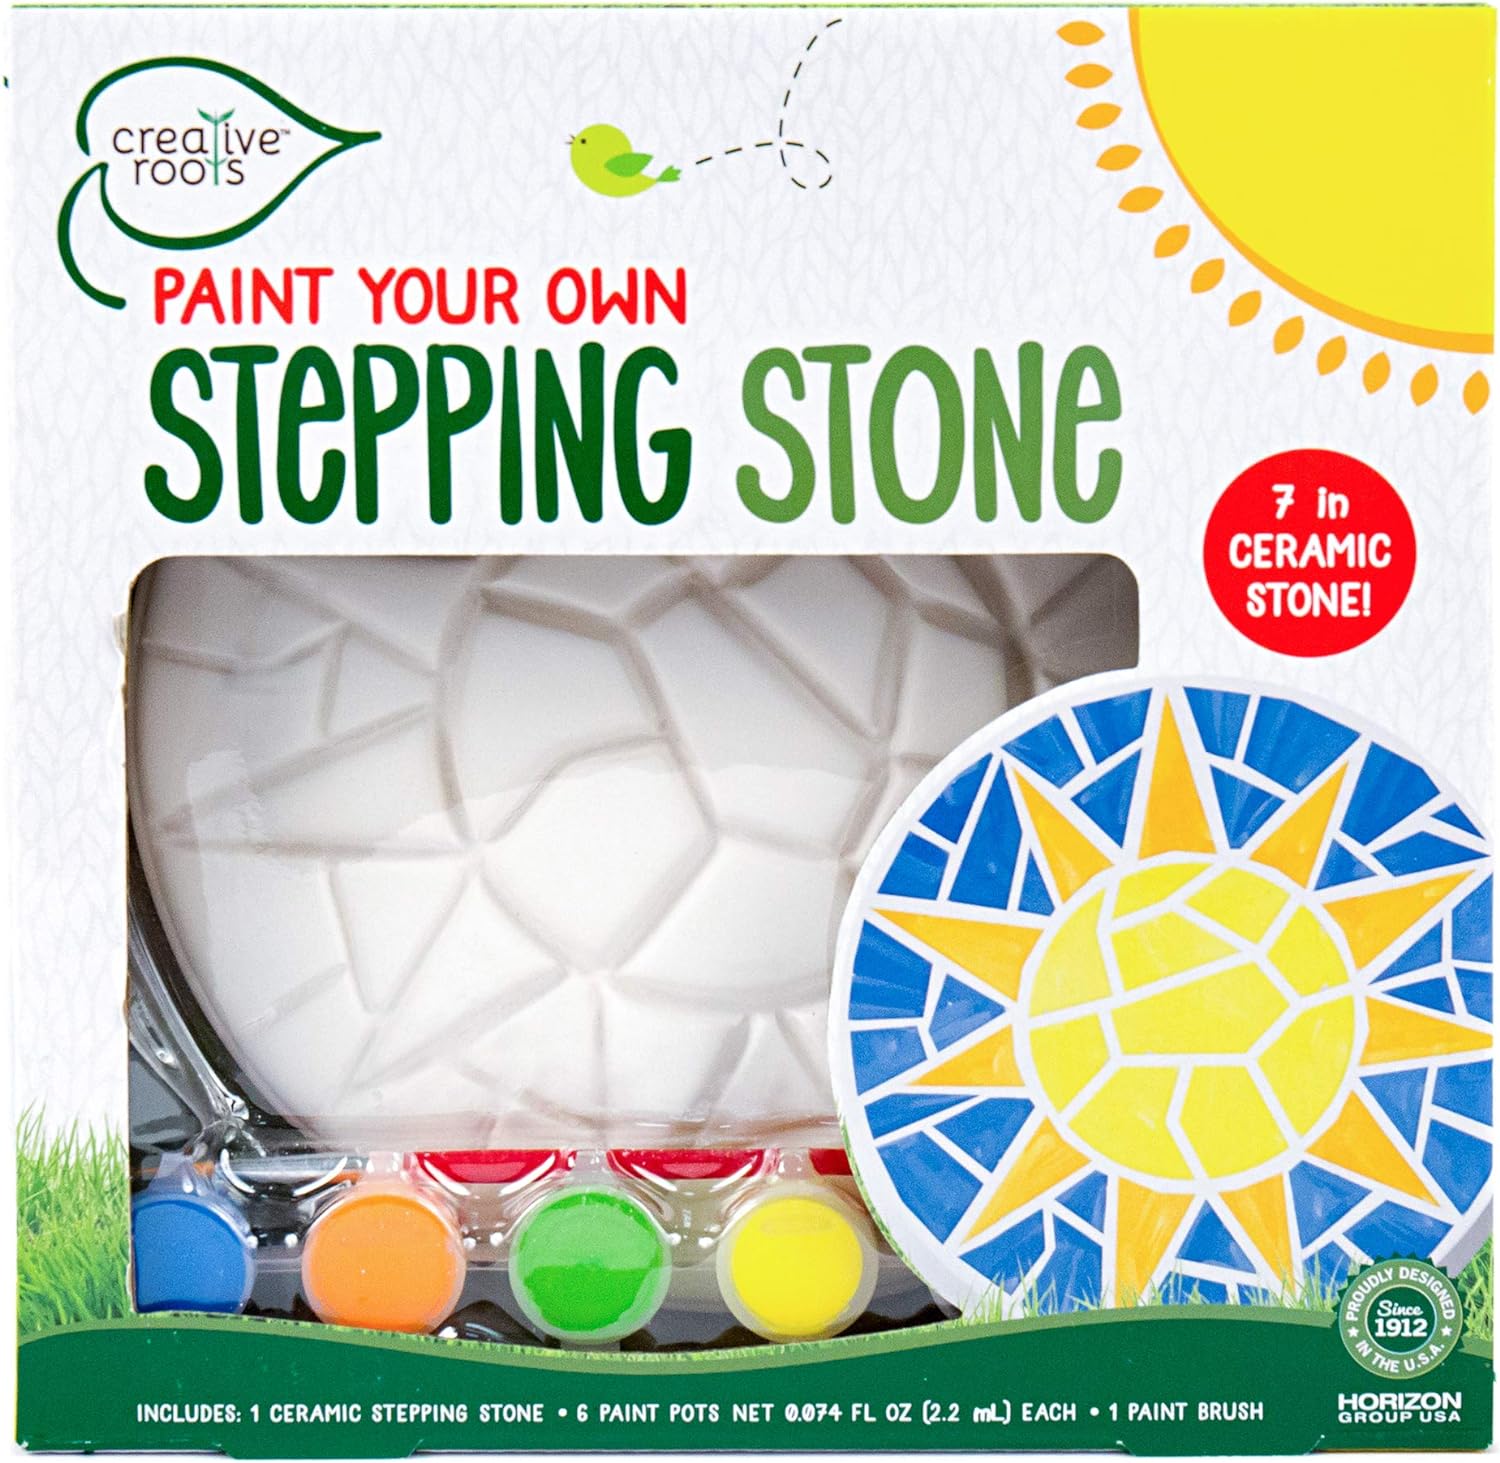 7" Creative Roots Mosaic Stepping Stone Kit (Various) $5.16 + Free Shipping w/ Prime or on orders over $35